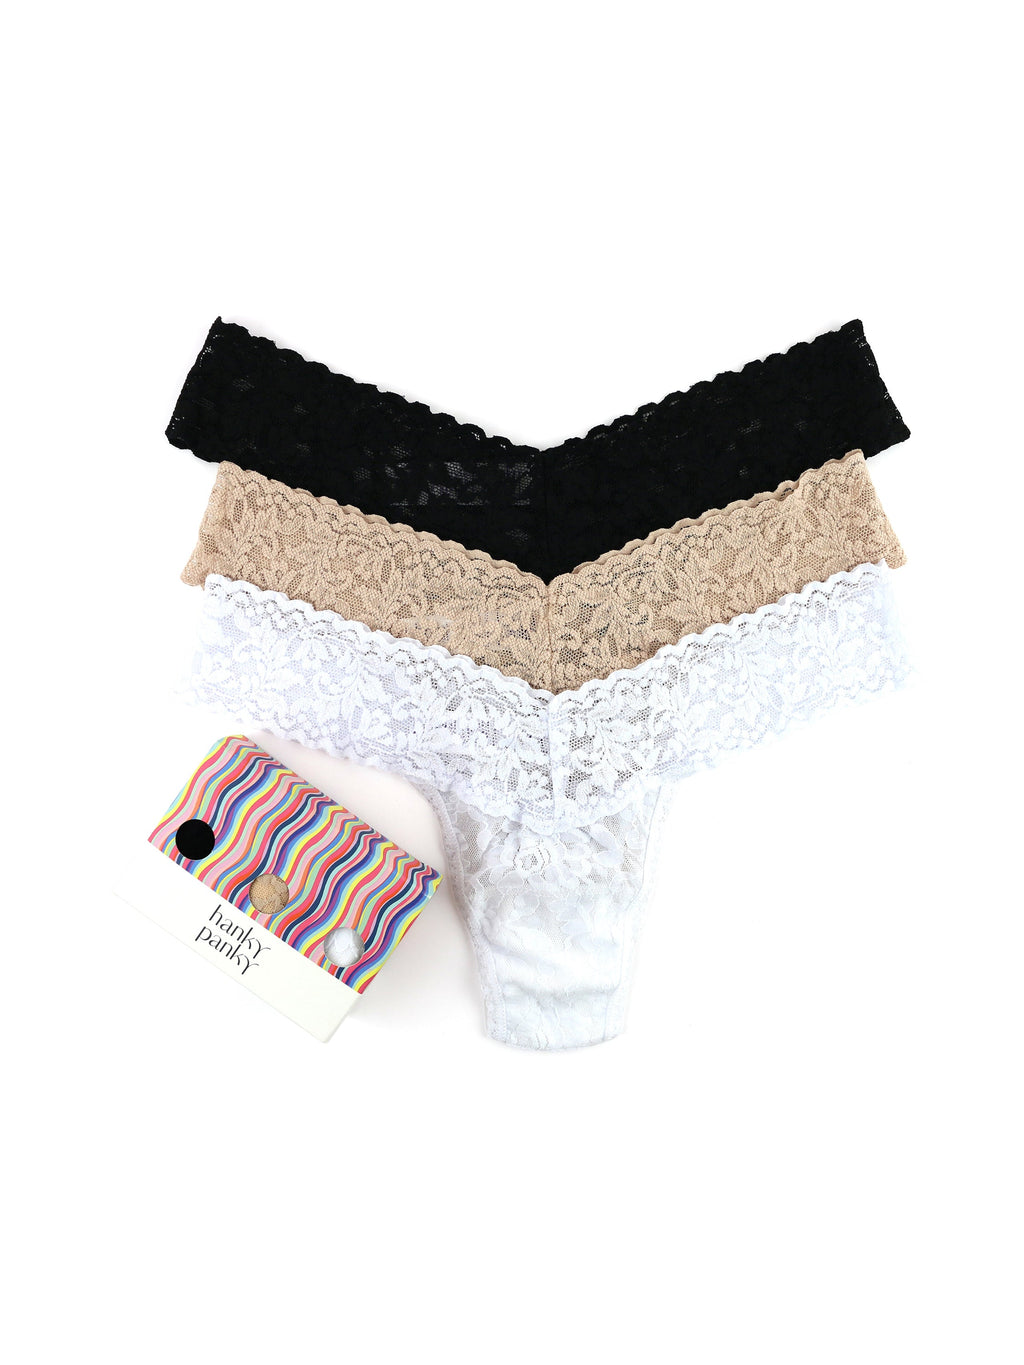 Popvcly Low-rise Comfortable Thong Briefs for Women,3Pack